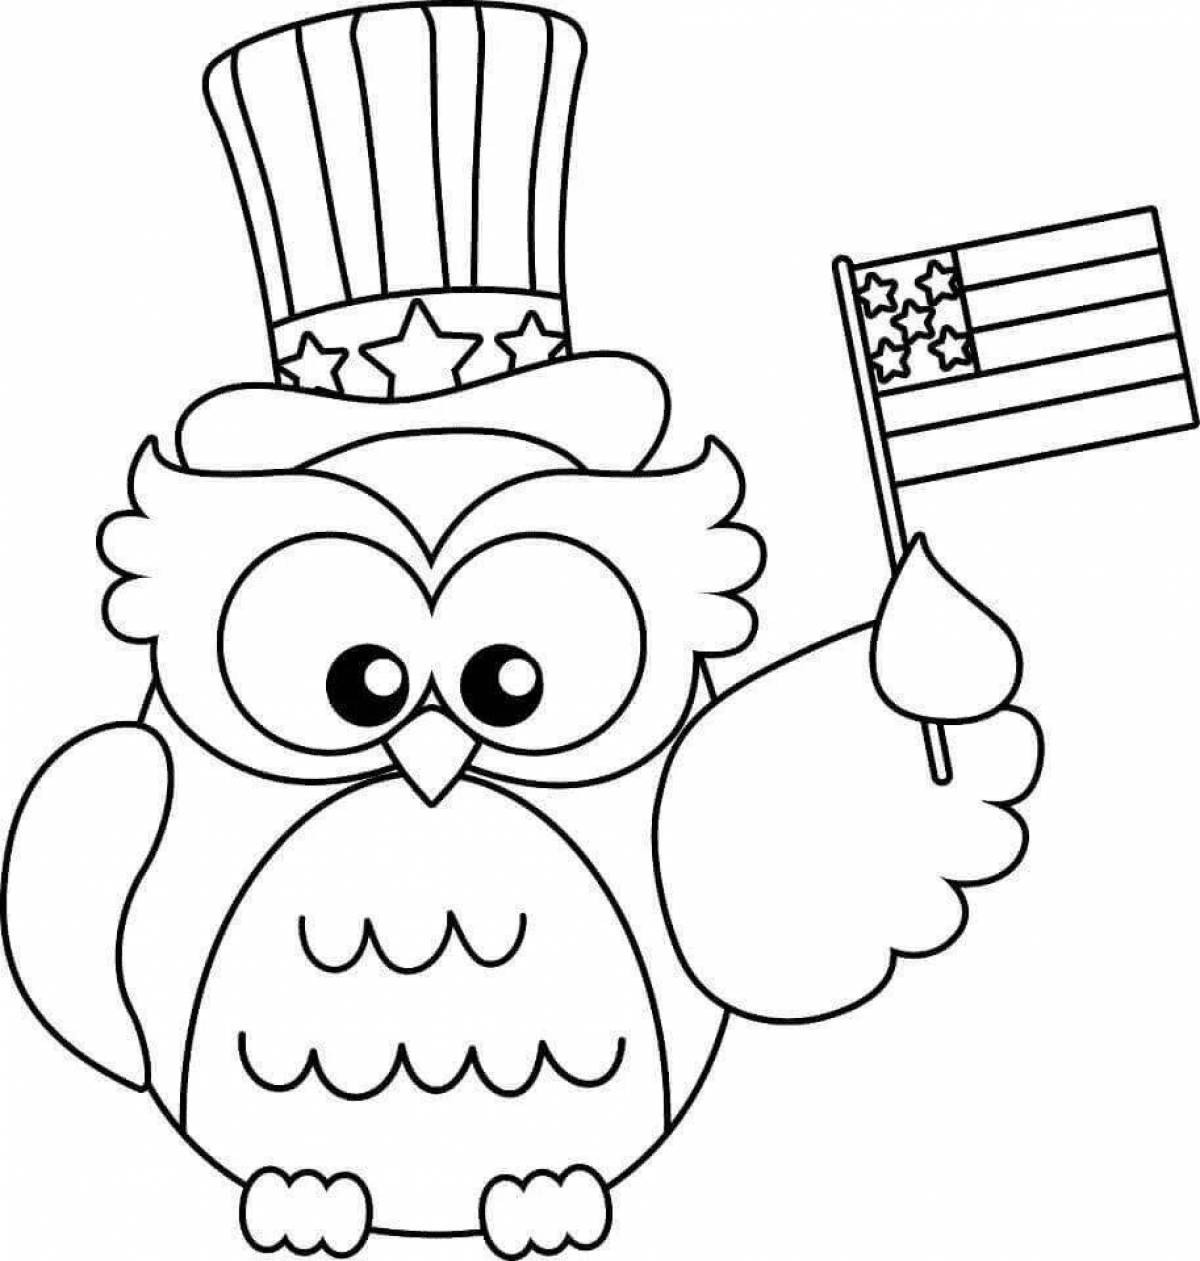 Majestic wise owl coloring book for children